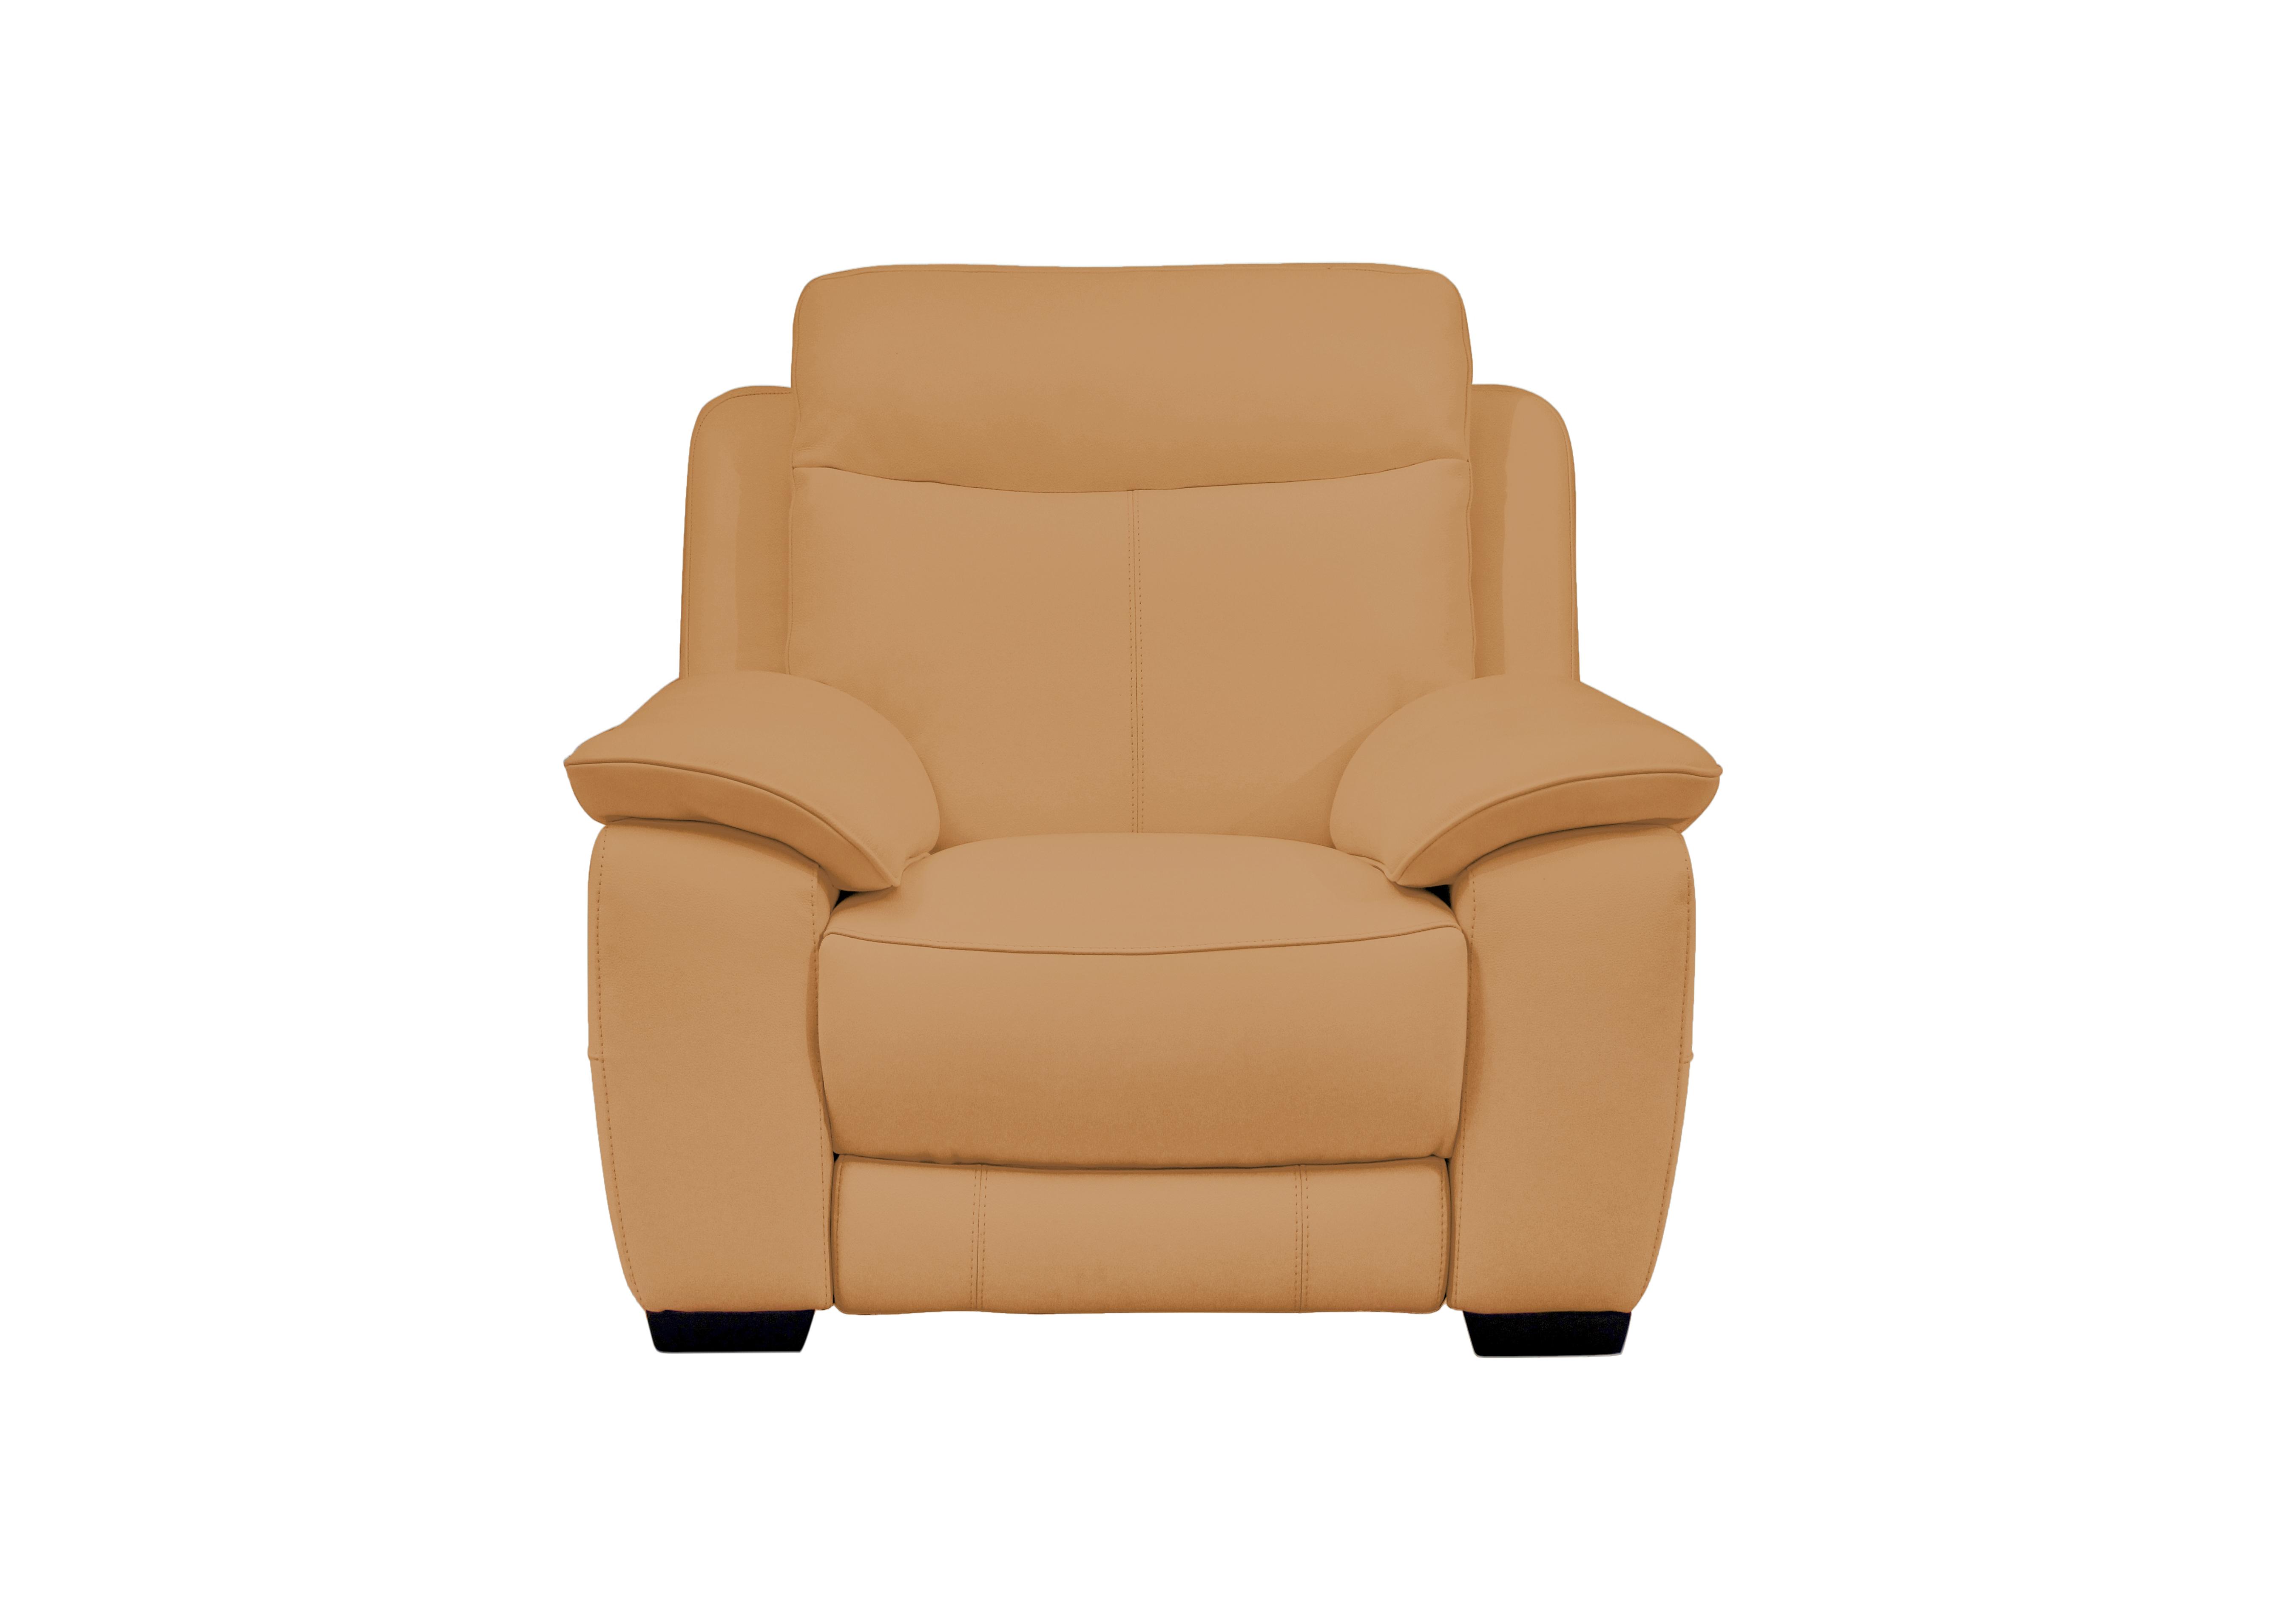 Starlight Express Leather Armchair in Bv-335e Honey Yellow on Furniture Village